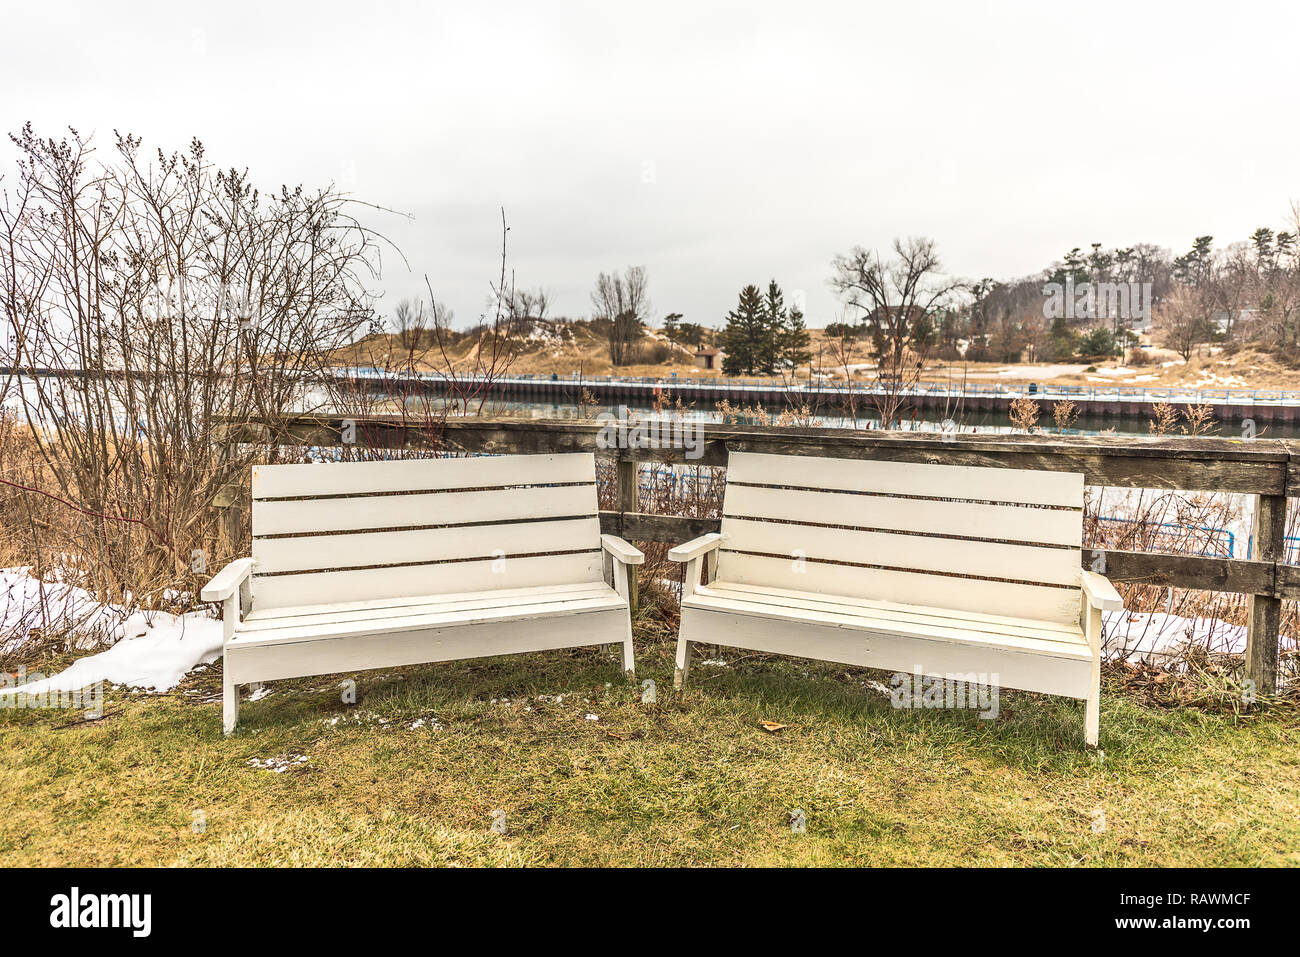 Two cream-colored benches waiting for someone to sit down and visit with the White River behind them. Stock Photo